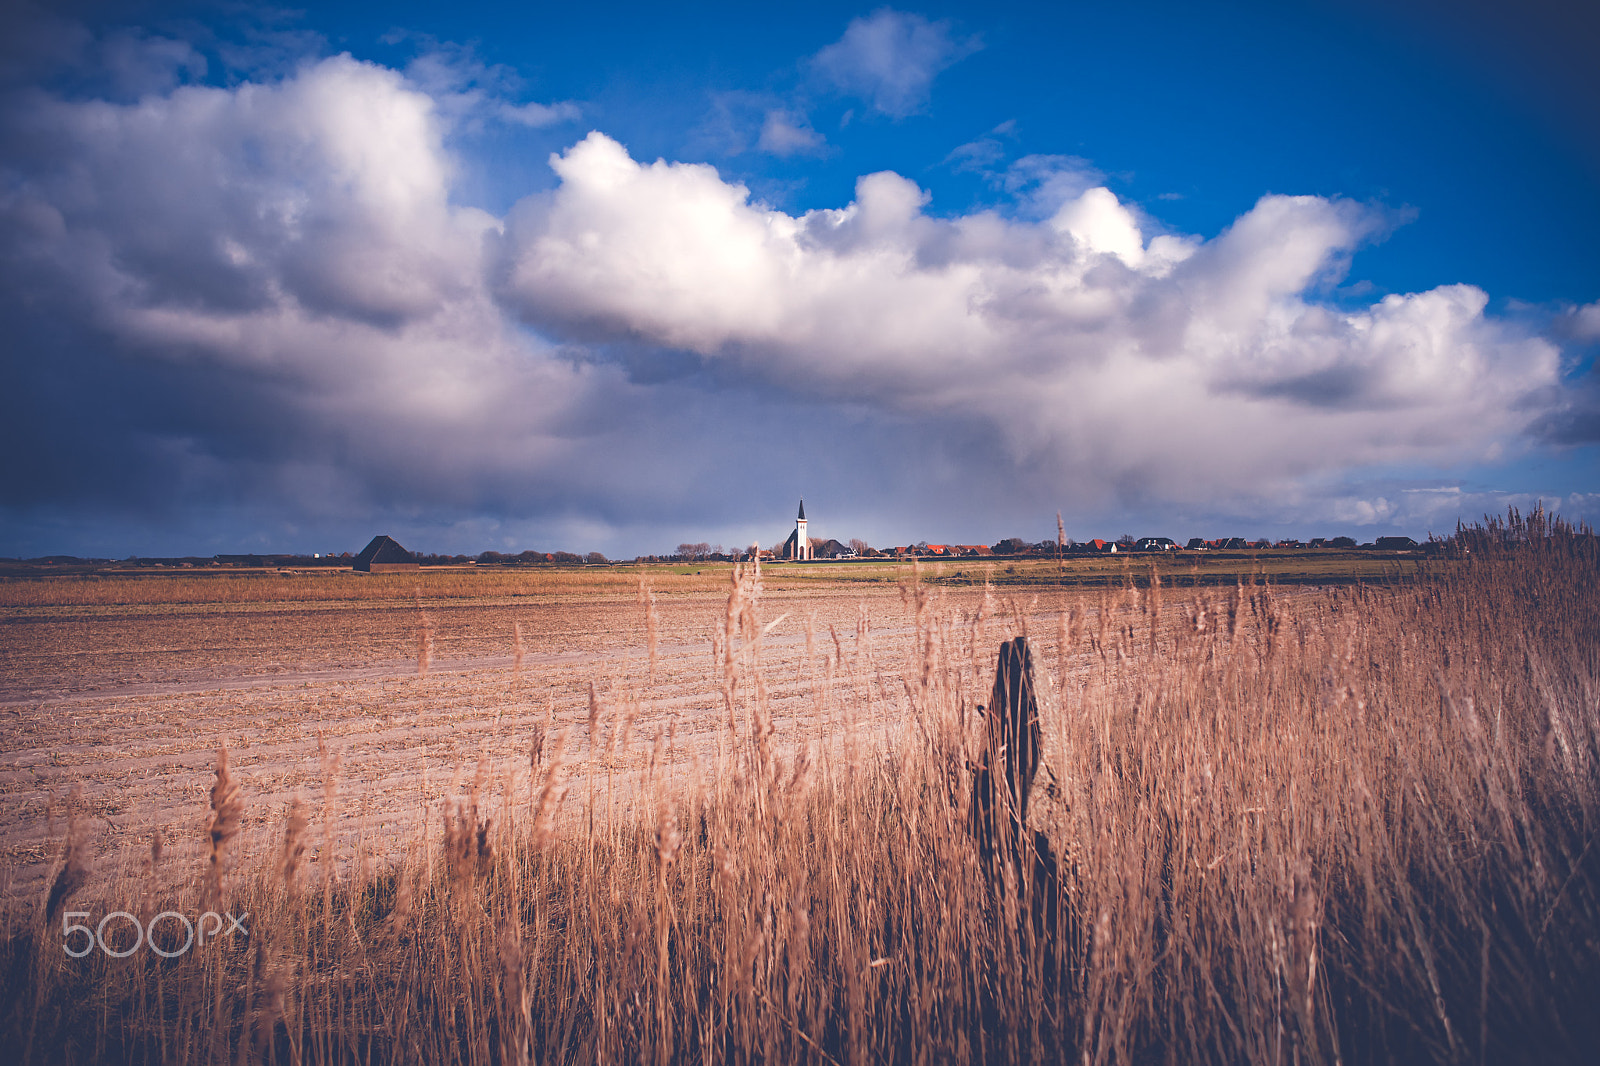 Sony Alpha DSLR-A900 sample photo. Typical white church in landscape at the island, texel, holland photography